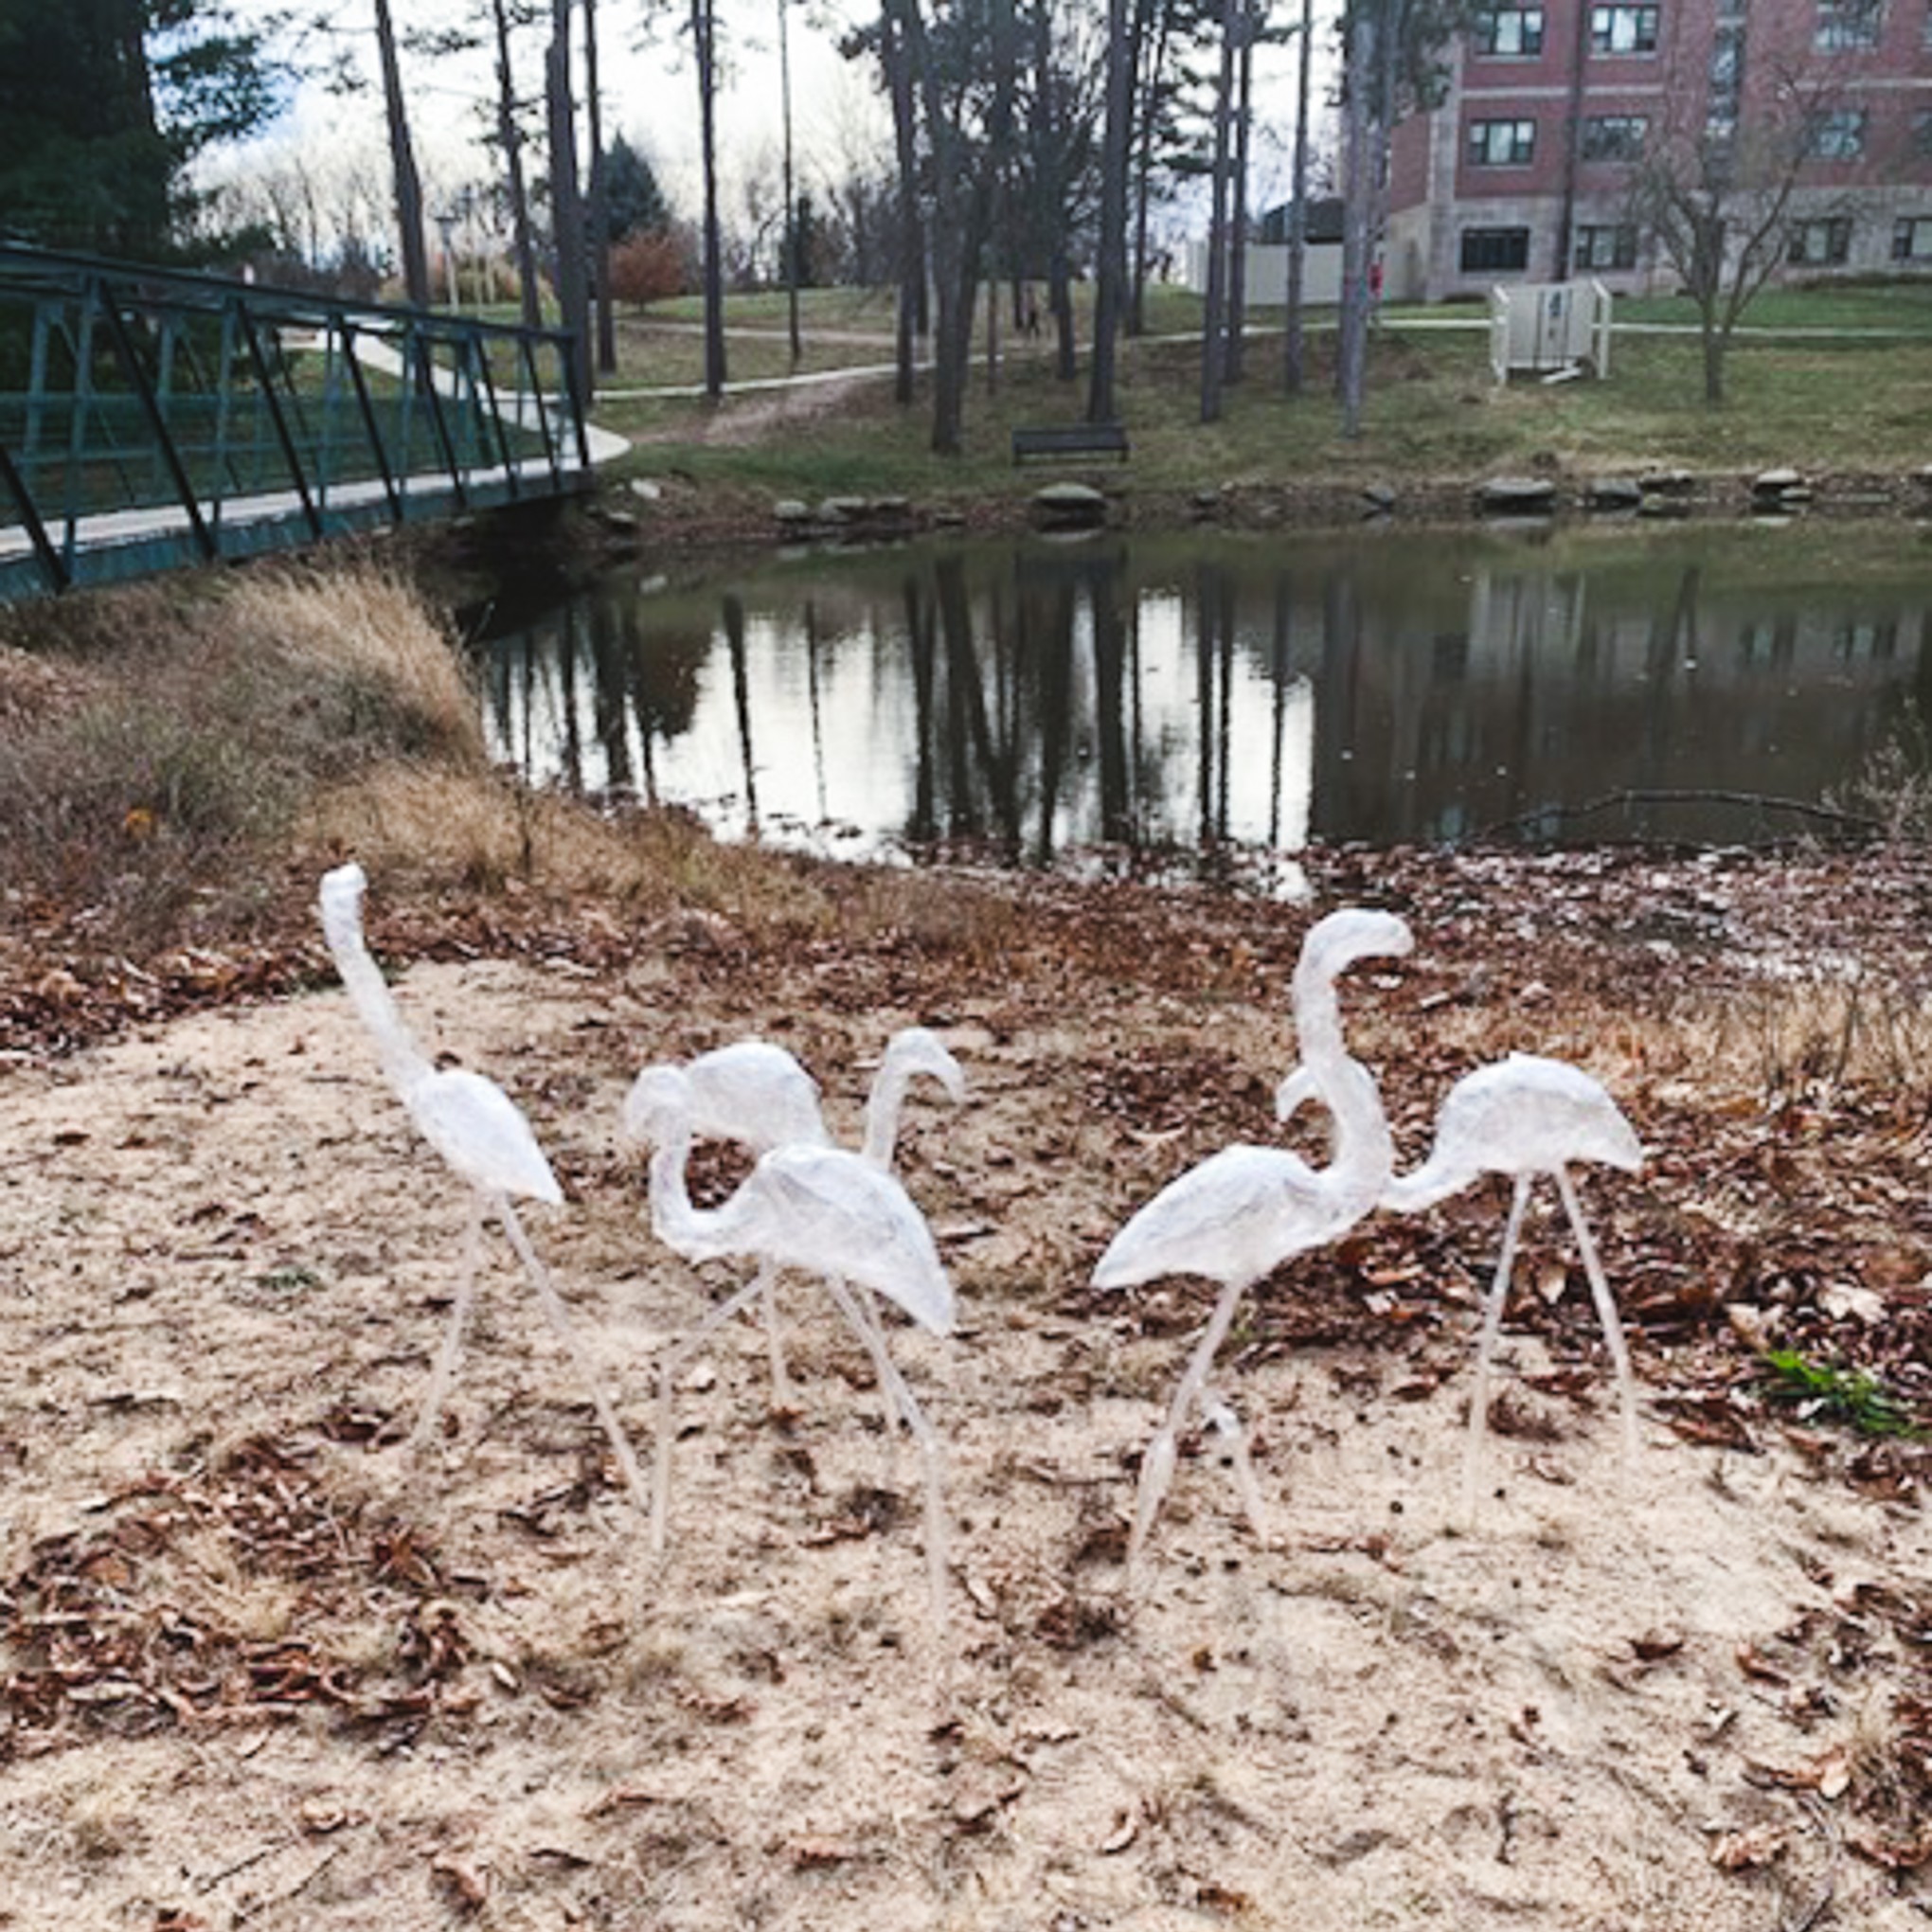 A flock of packing tape flamingos, created by Lizzy Sand, on the shores of Doane Lake.